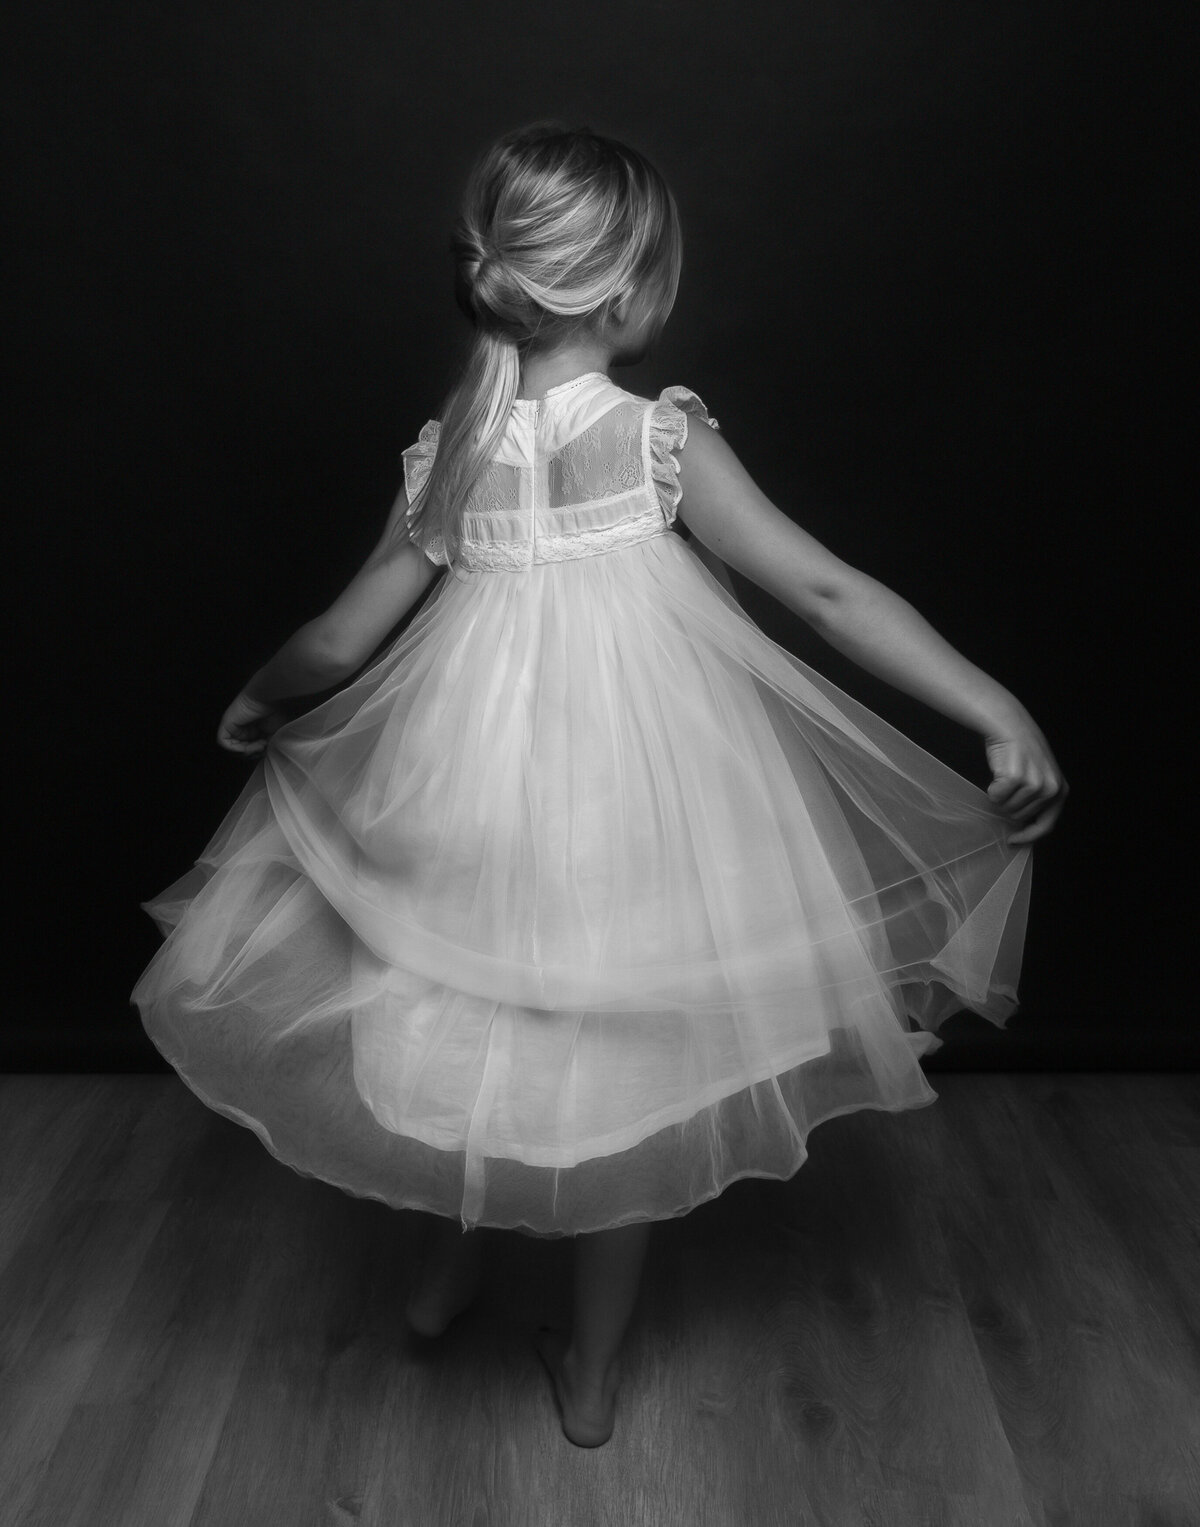 child facing backwards and holding flowing satin dress with bare feet on finished studio floor